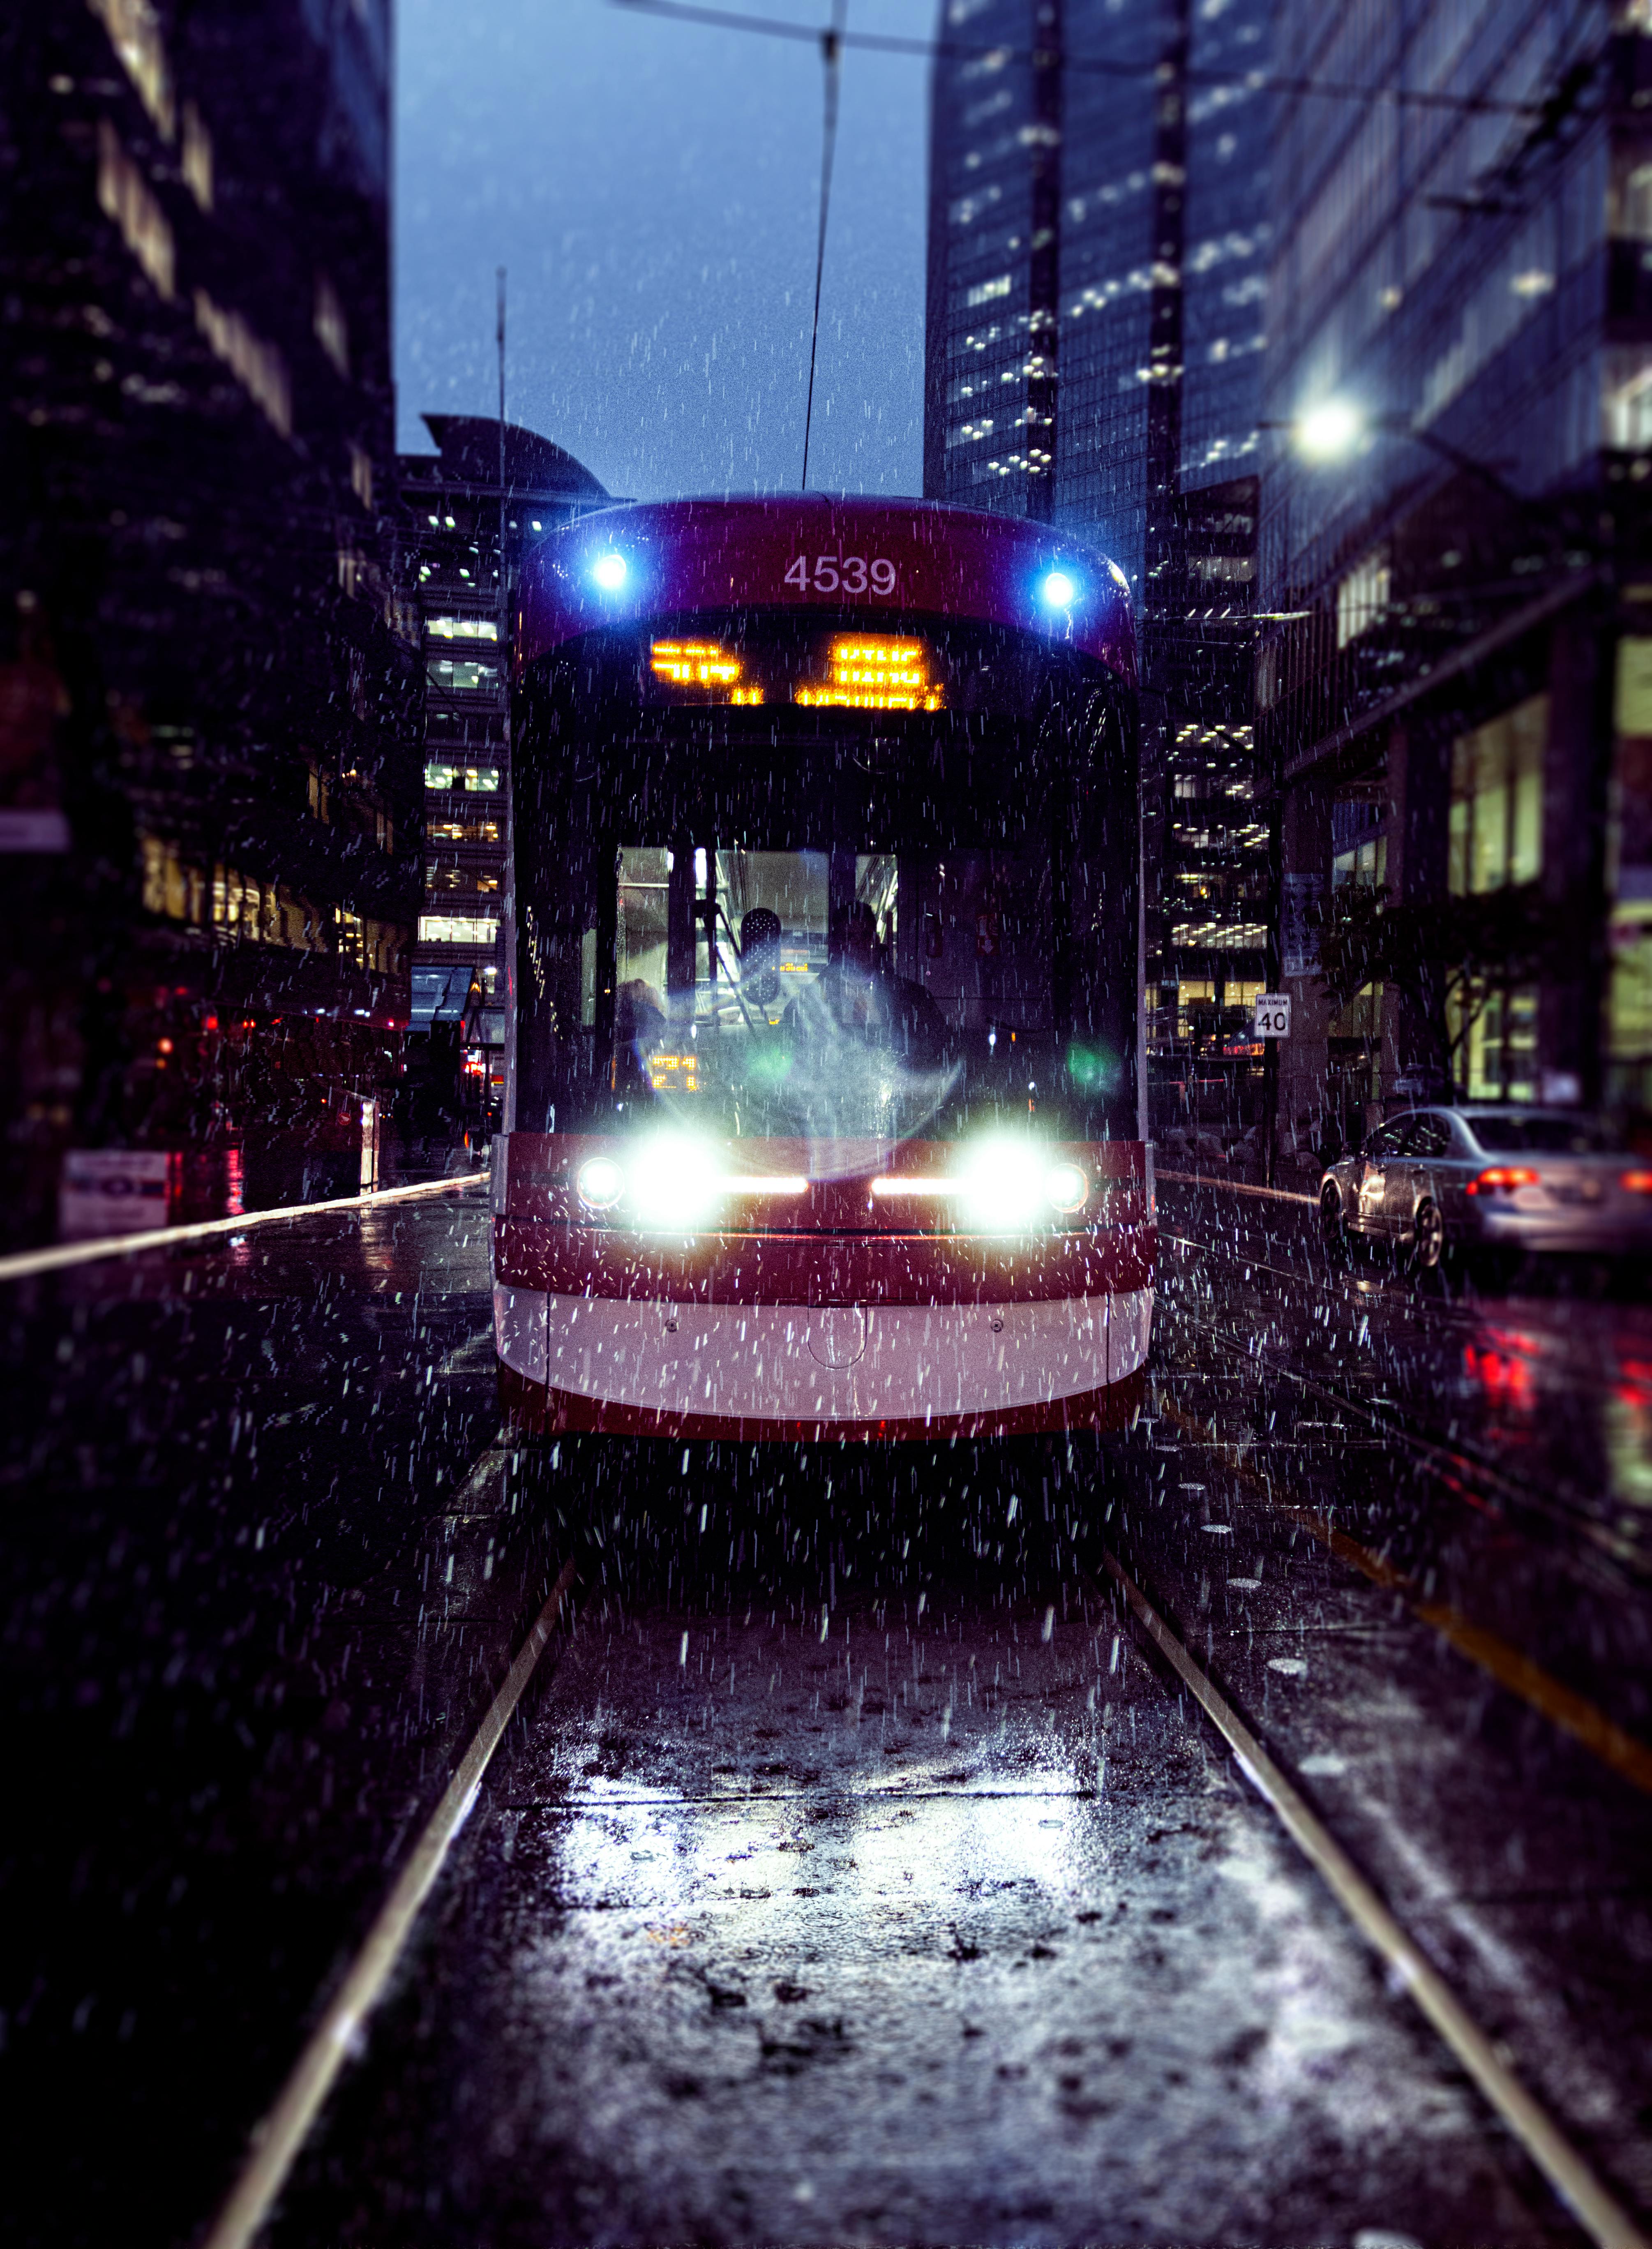 red and white tram on a rainy night